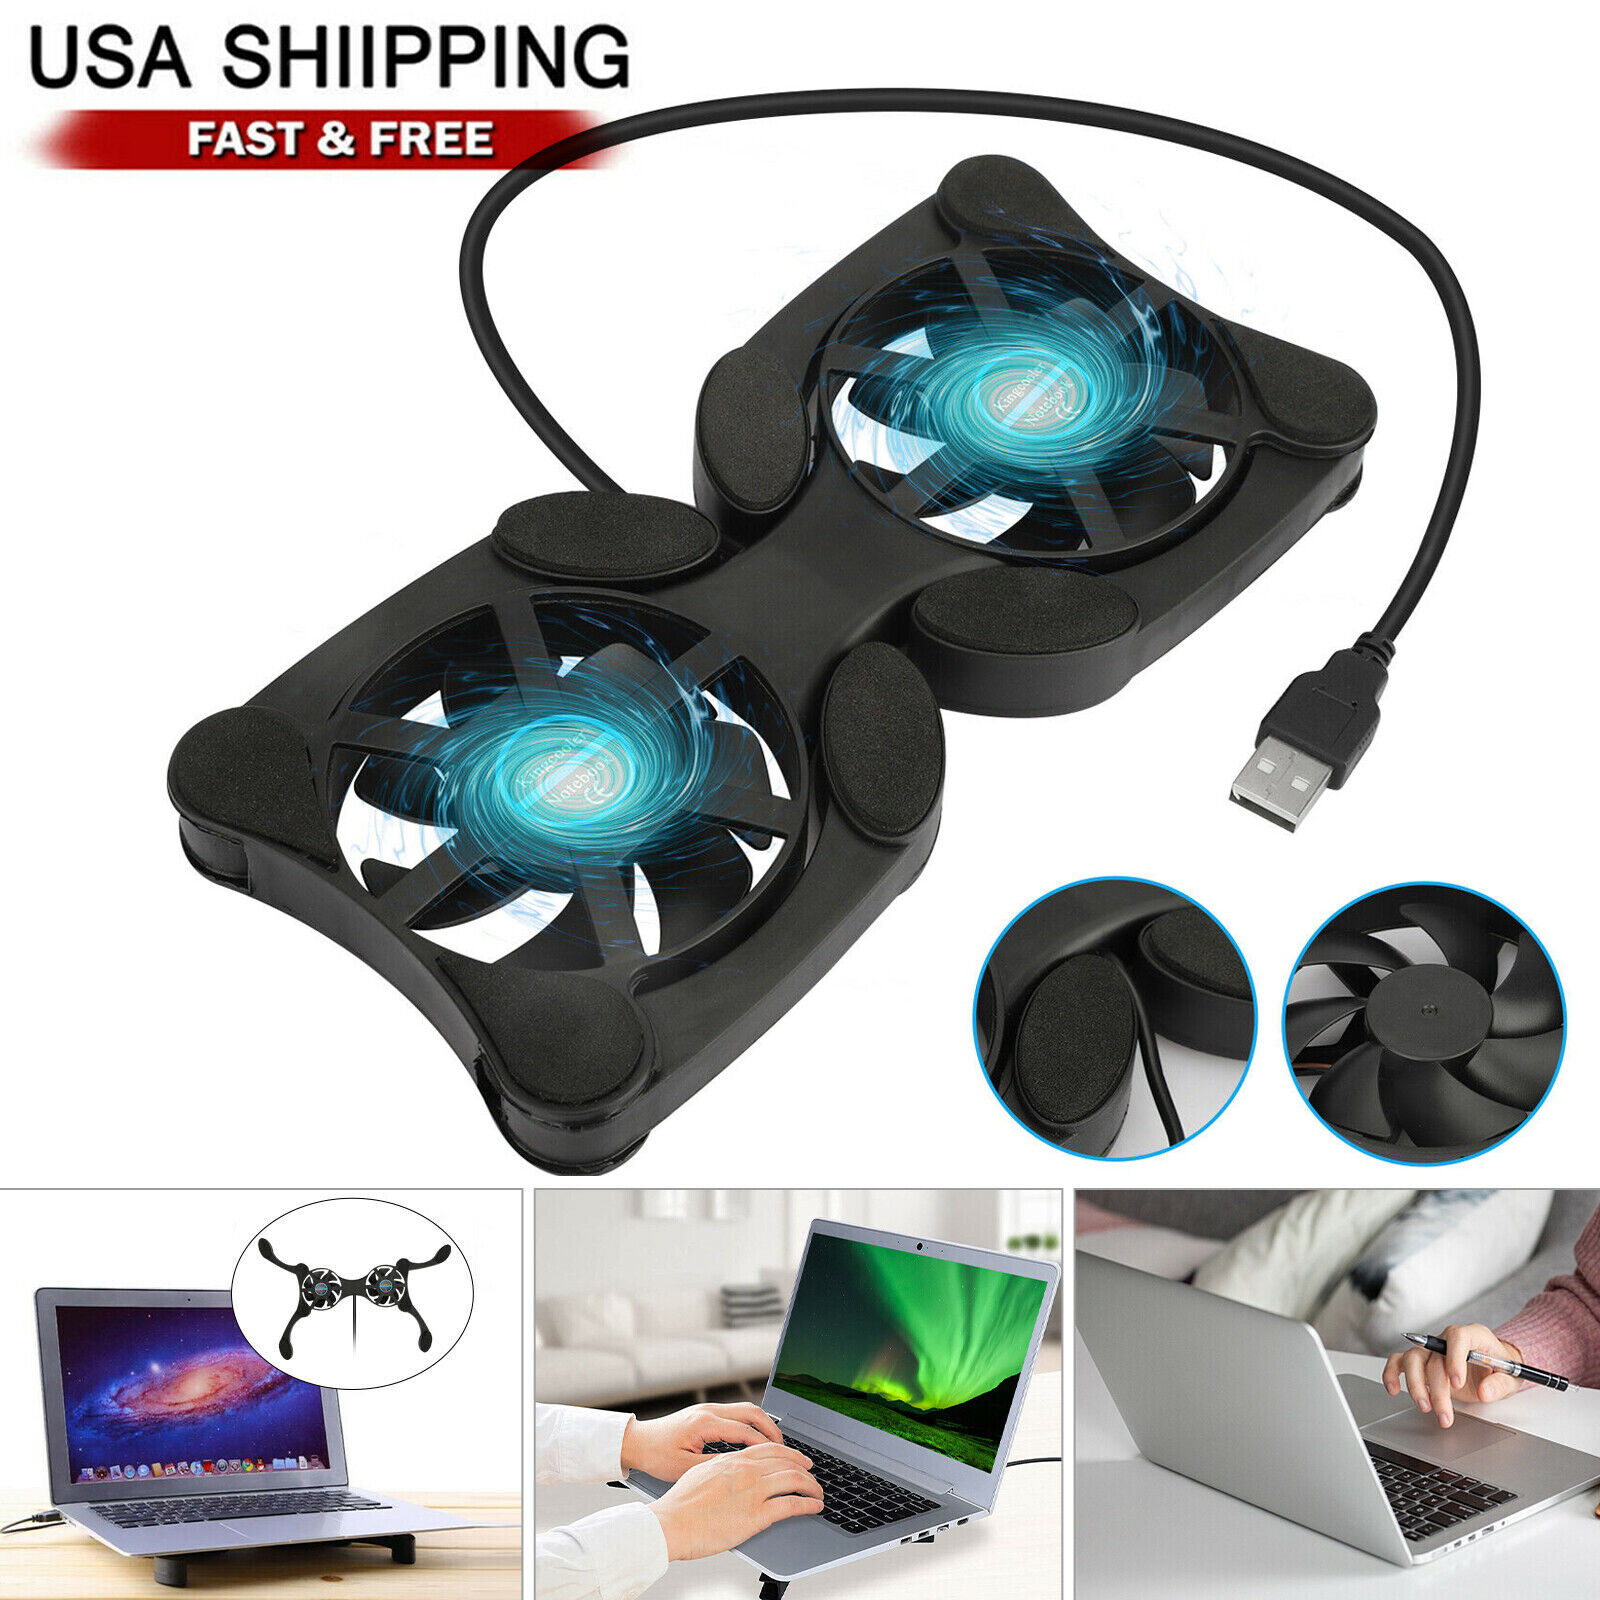 Dual USB Cooling Fan Pad Foldable Slim Fans Cooler Stand for Laptop PC Notebook